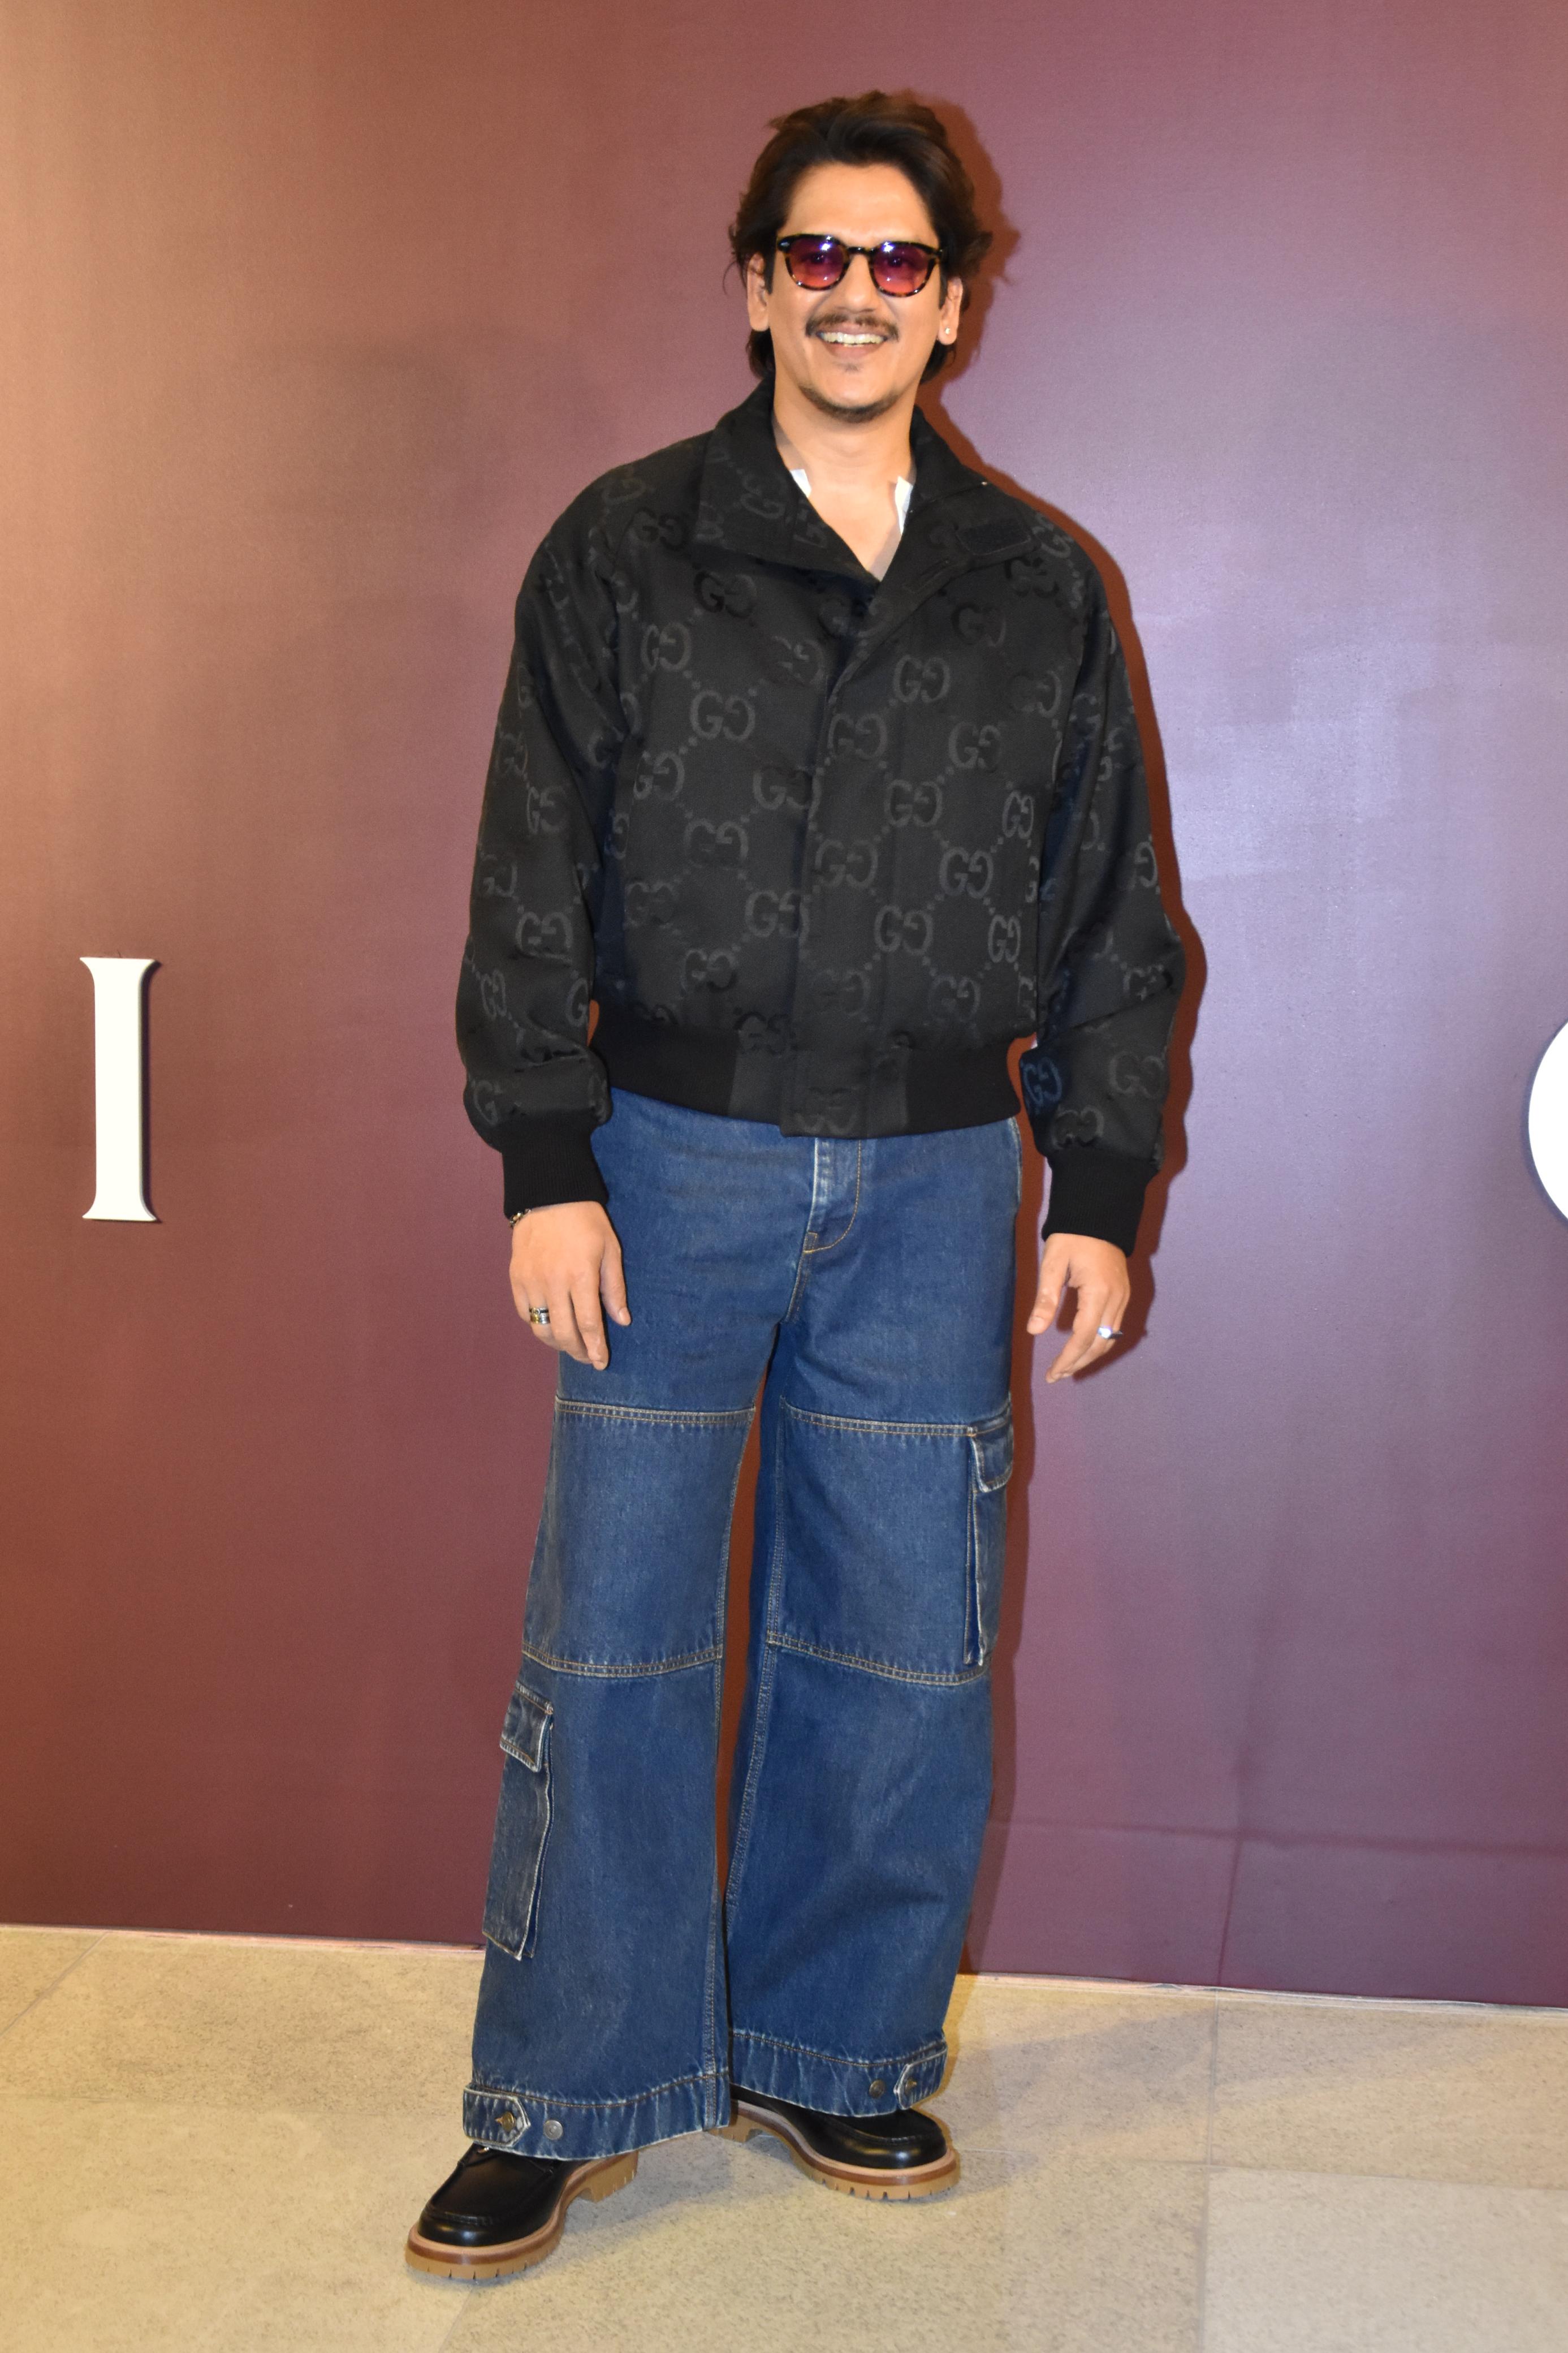 Vijay Varma once again captivated the audience with his impeccable sense of style. The actor donned a stunning black jacket paired elegantly with wide-legged blue jeans, effortlessly stealing the show